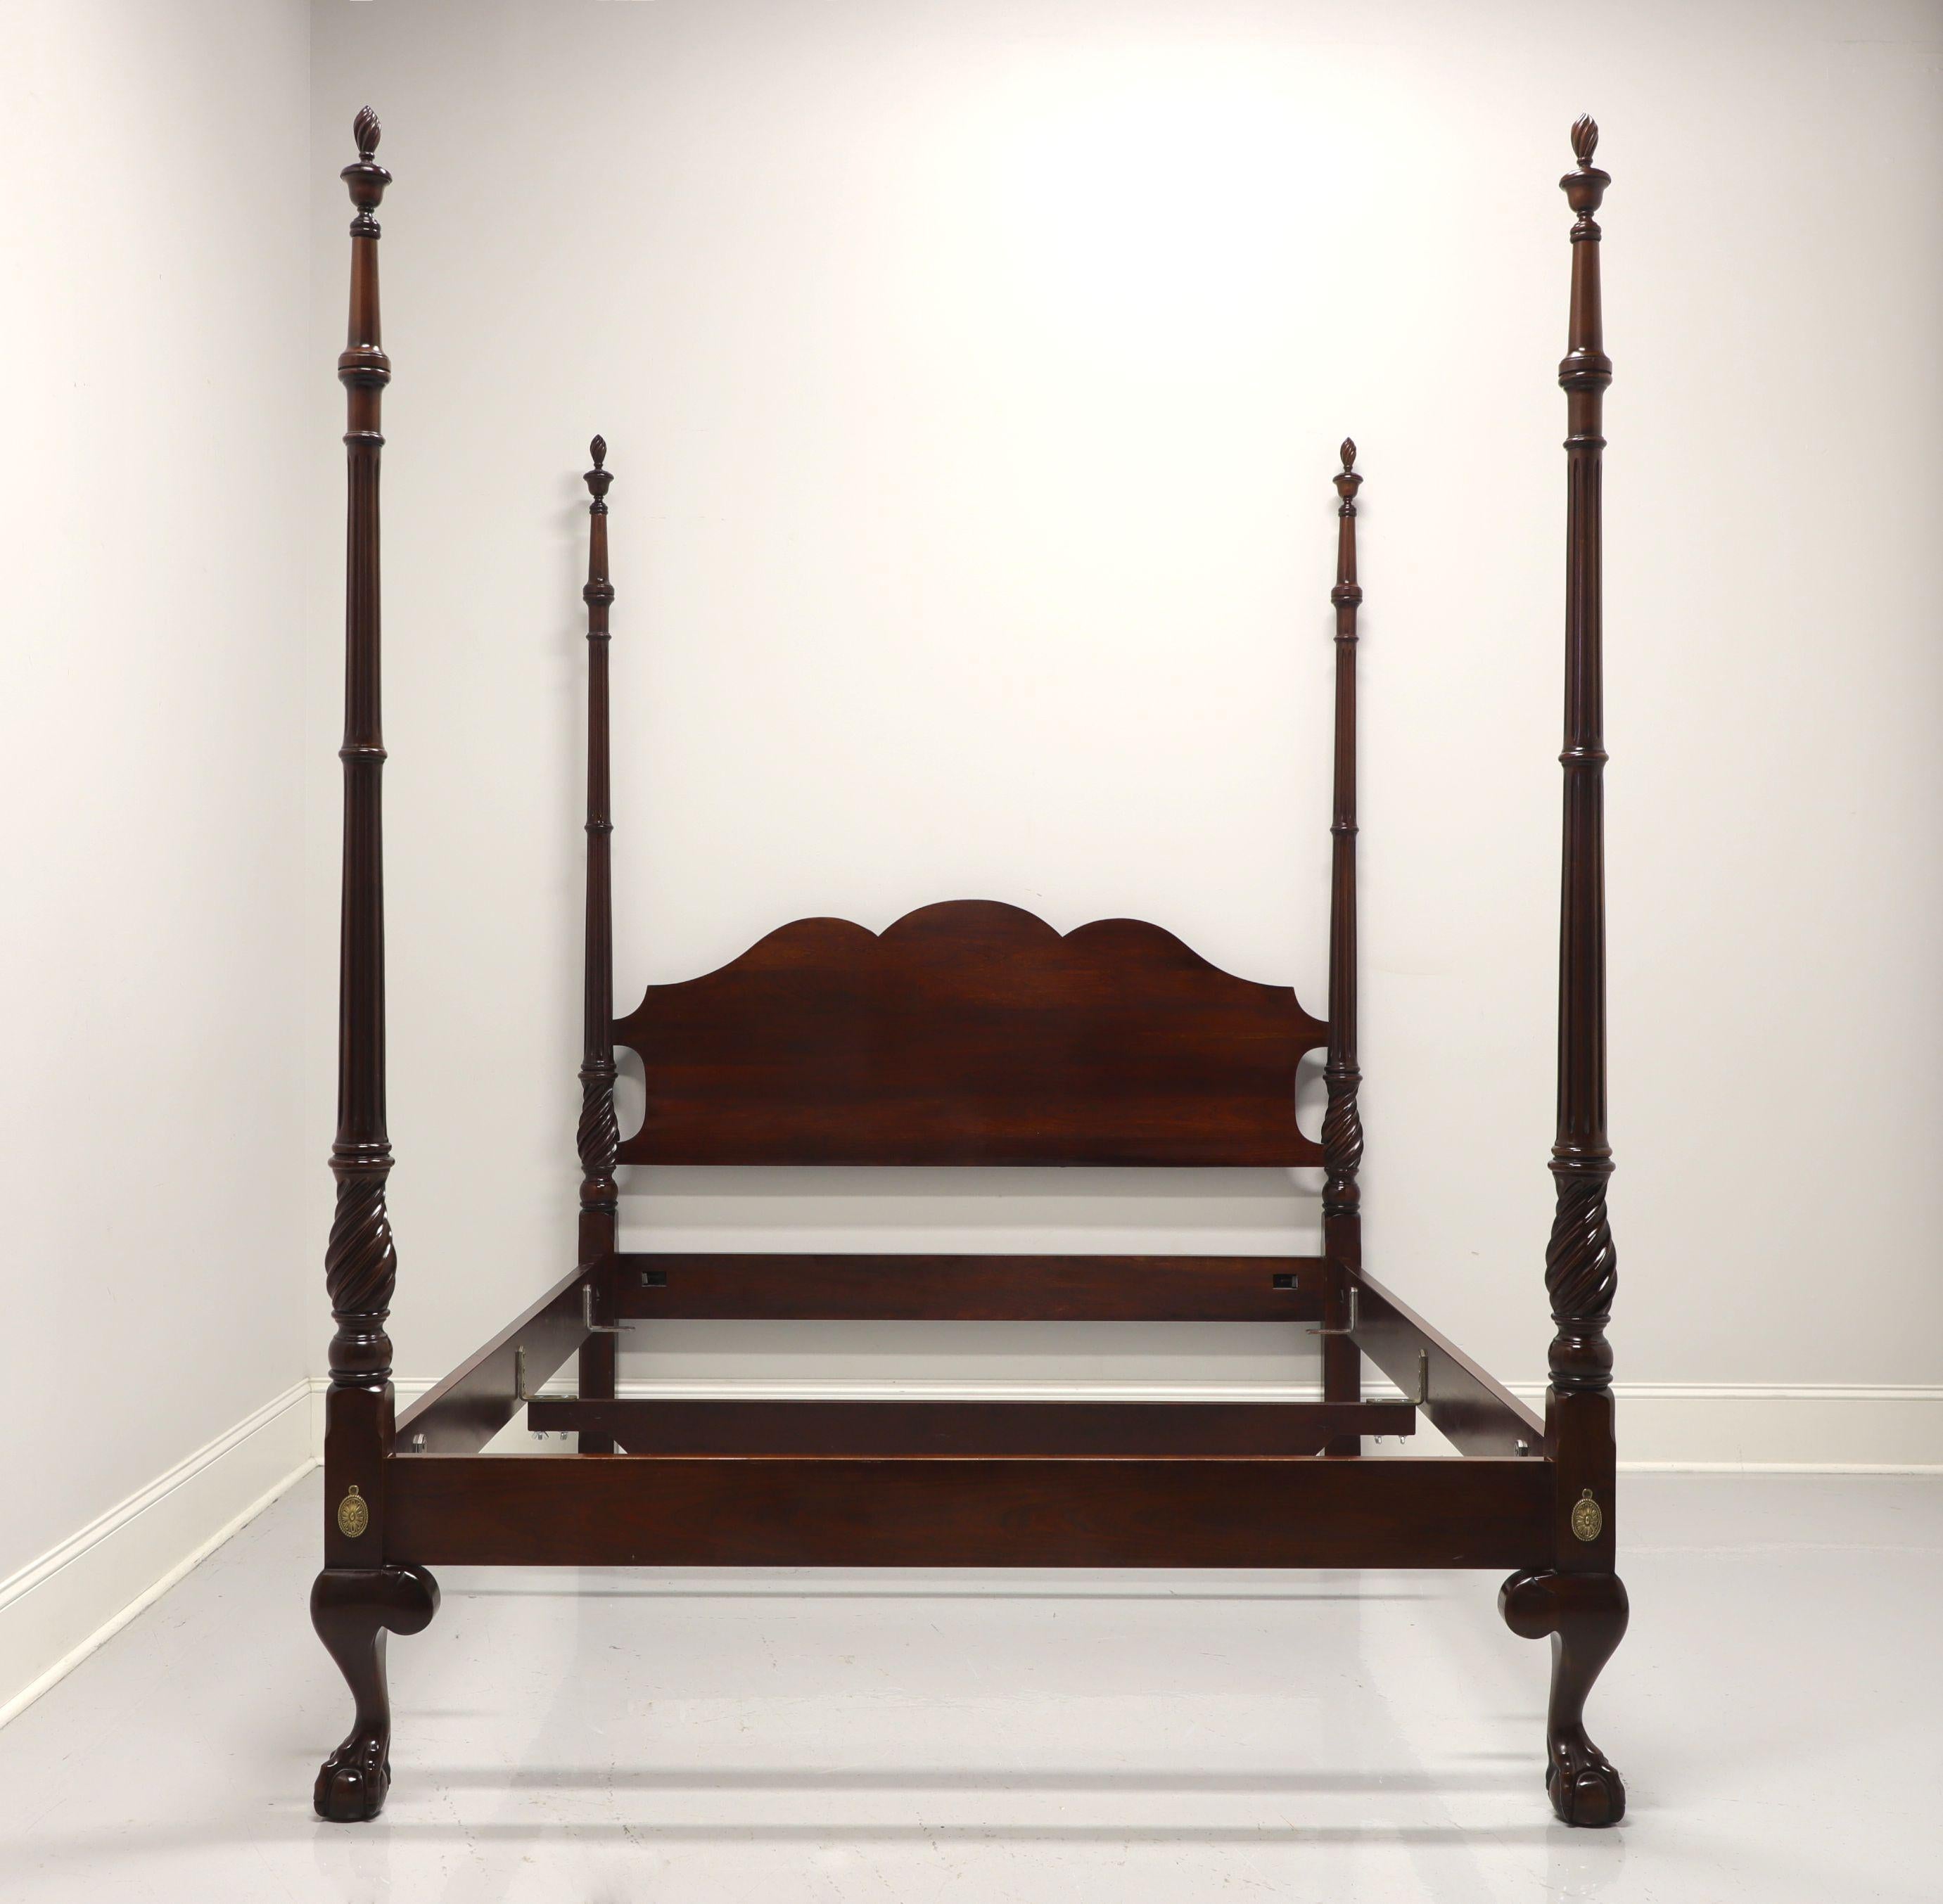 A Chippendale style queen size four post bed by Statton Furniture. Solid cherry with their Old Towne finish, four turned & fluted column like posts with finials and footboard with ball in claw feet. Brass covers to headboard and footboard. Metal